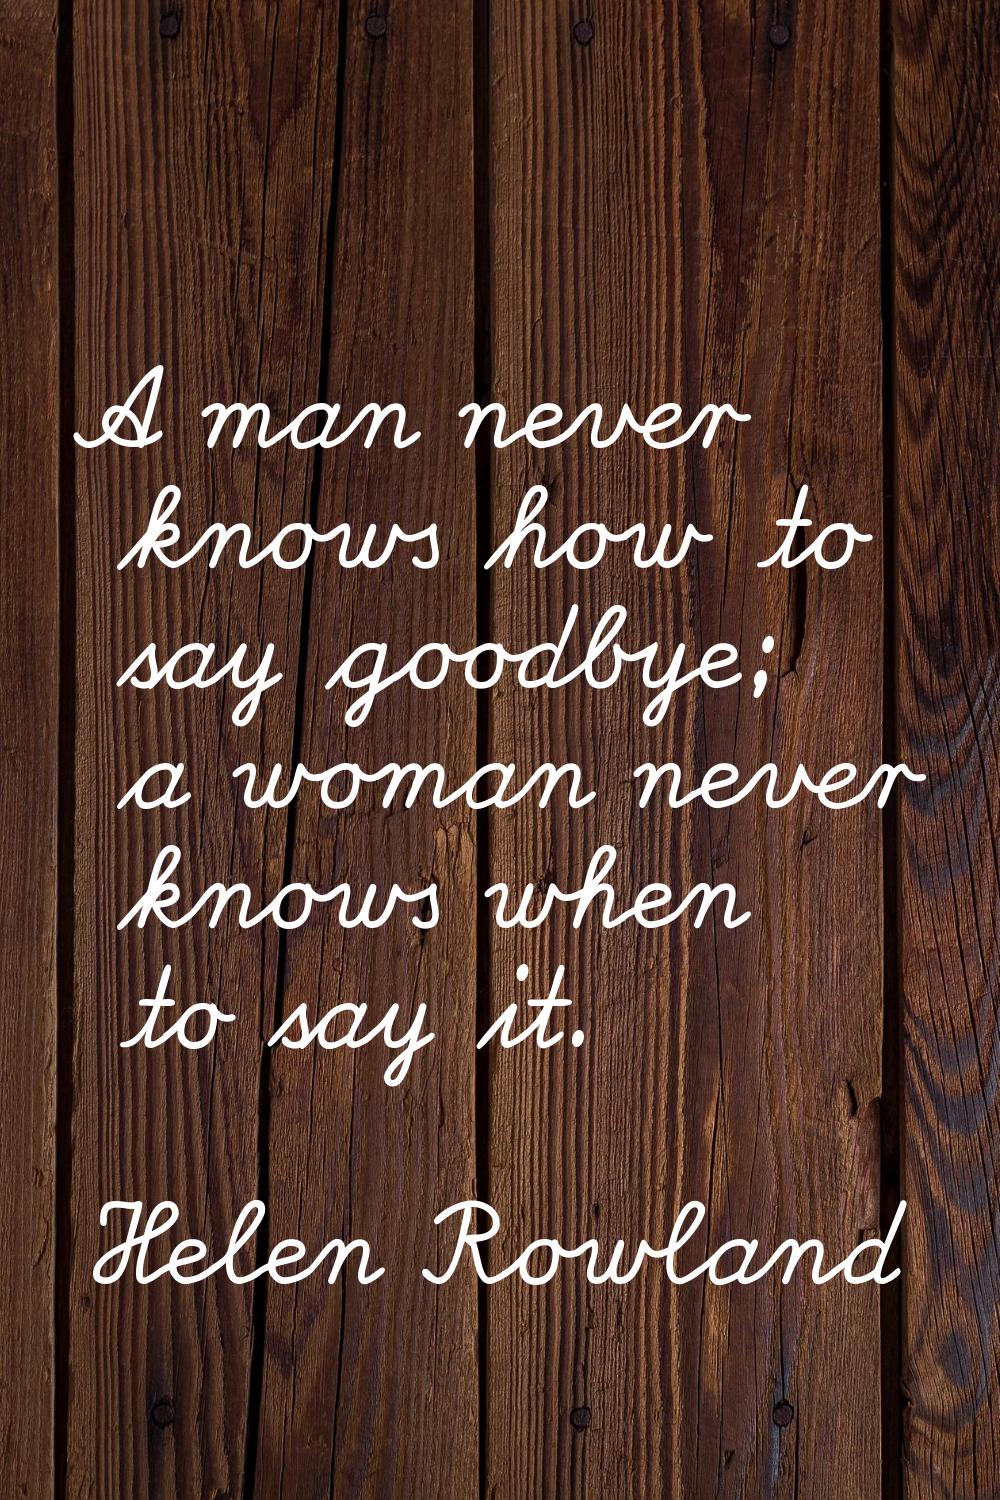 A man never knows how to say goodbye; a woman never knows when to say it.